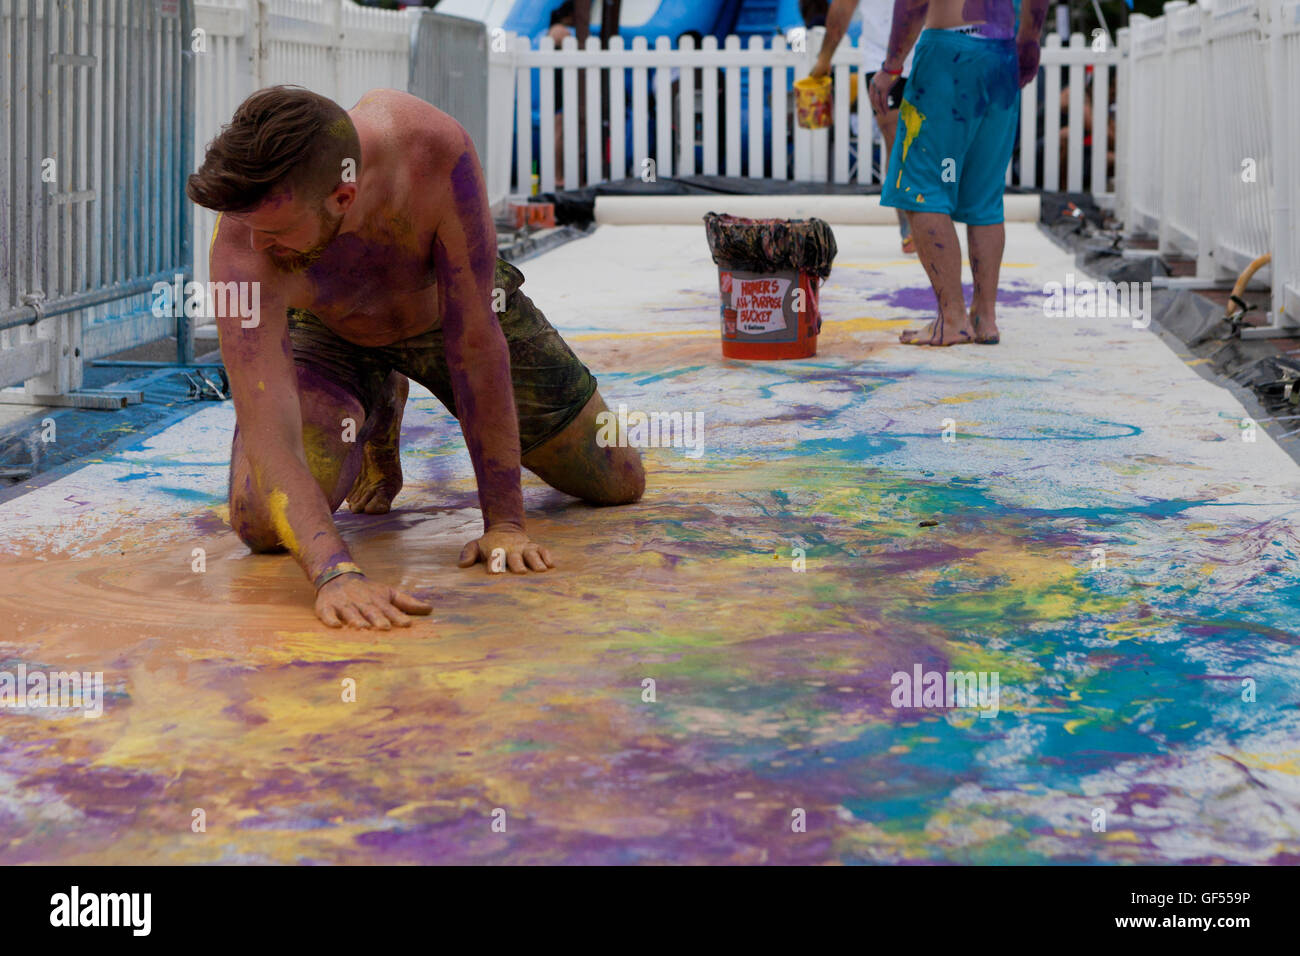 Men playing with paint at an outdoor festival - USA Stock Photo